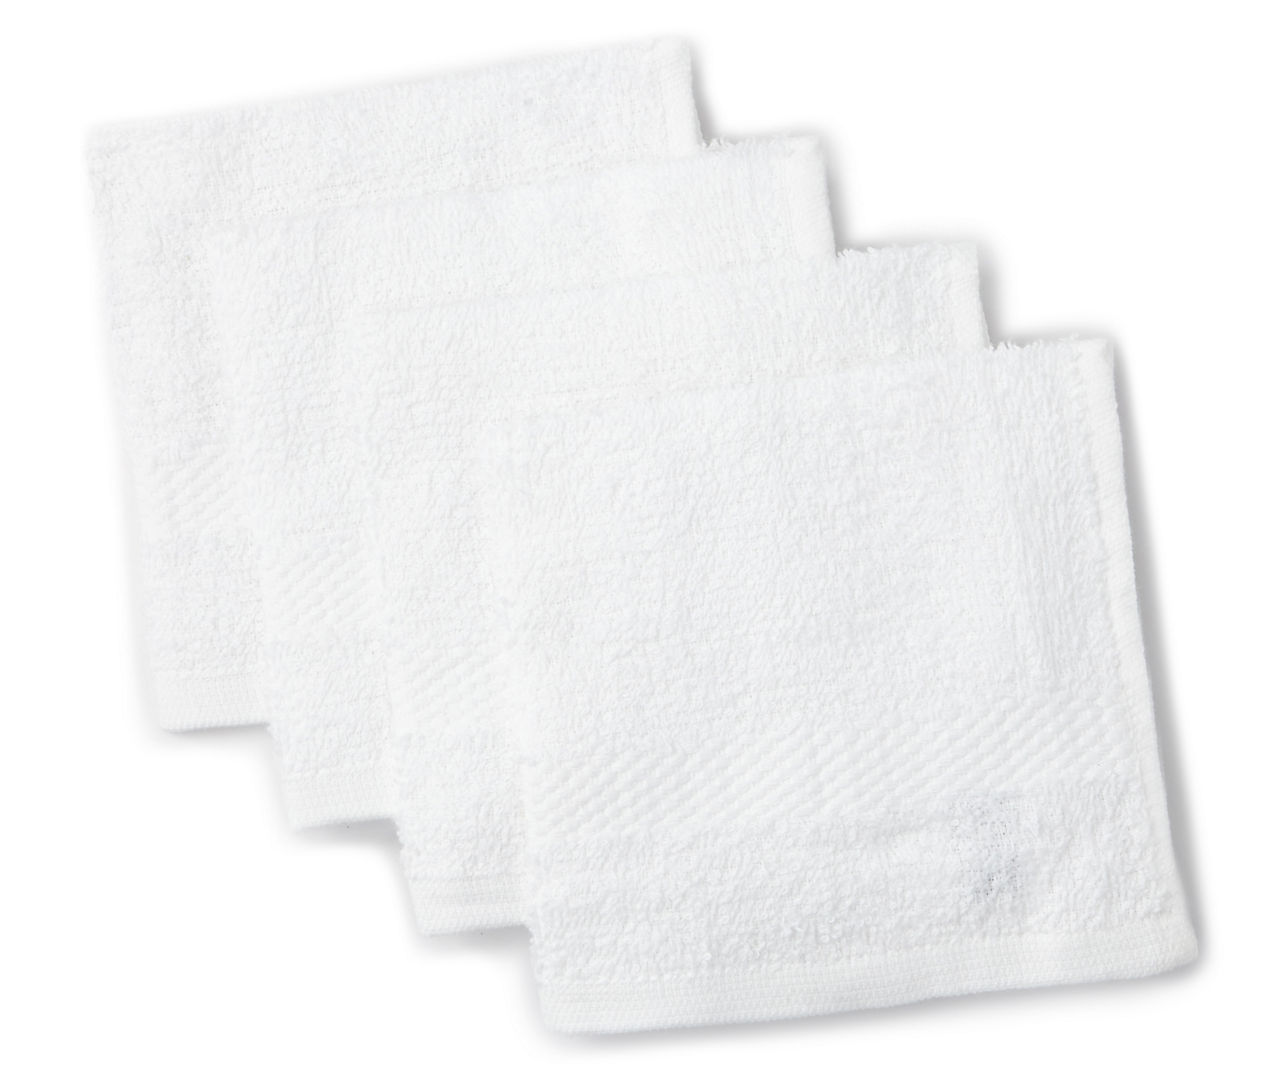 Just Home White Wash Cloths, 4-Pack